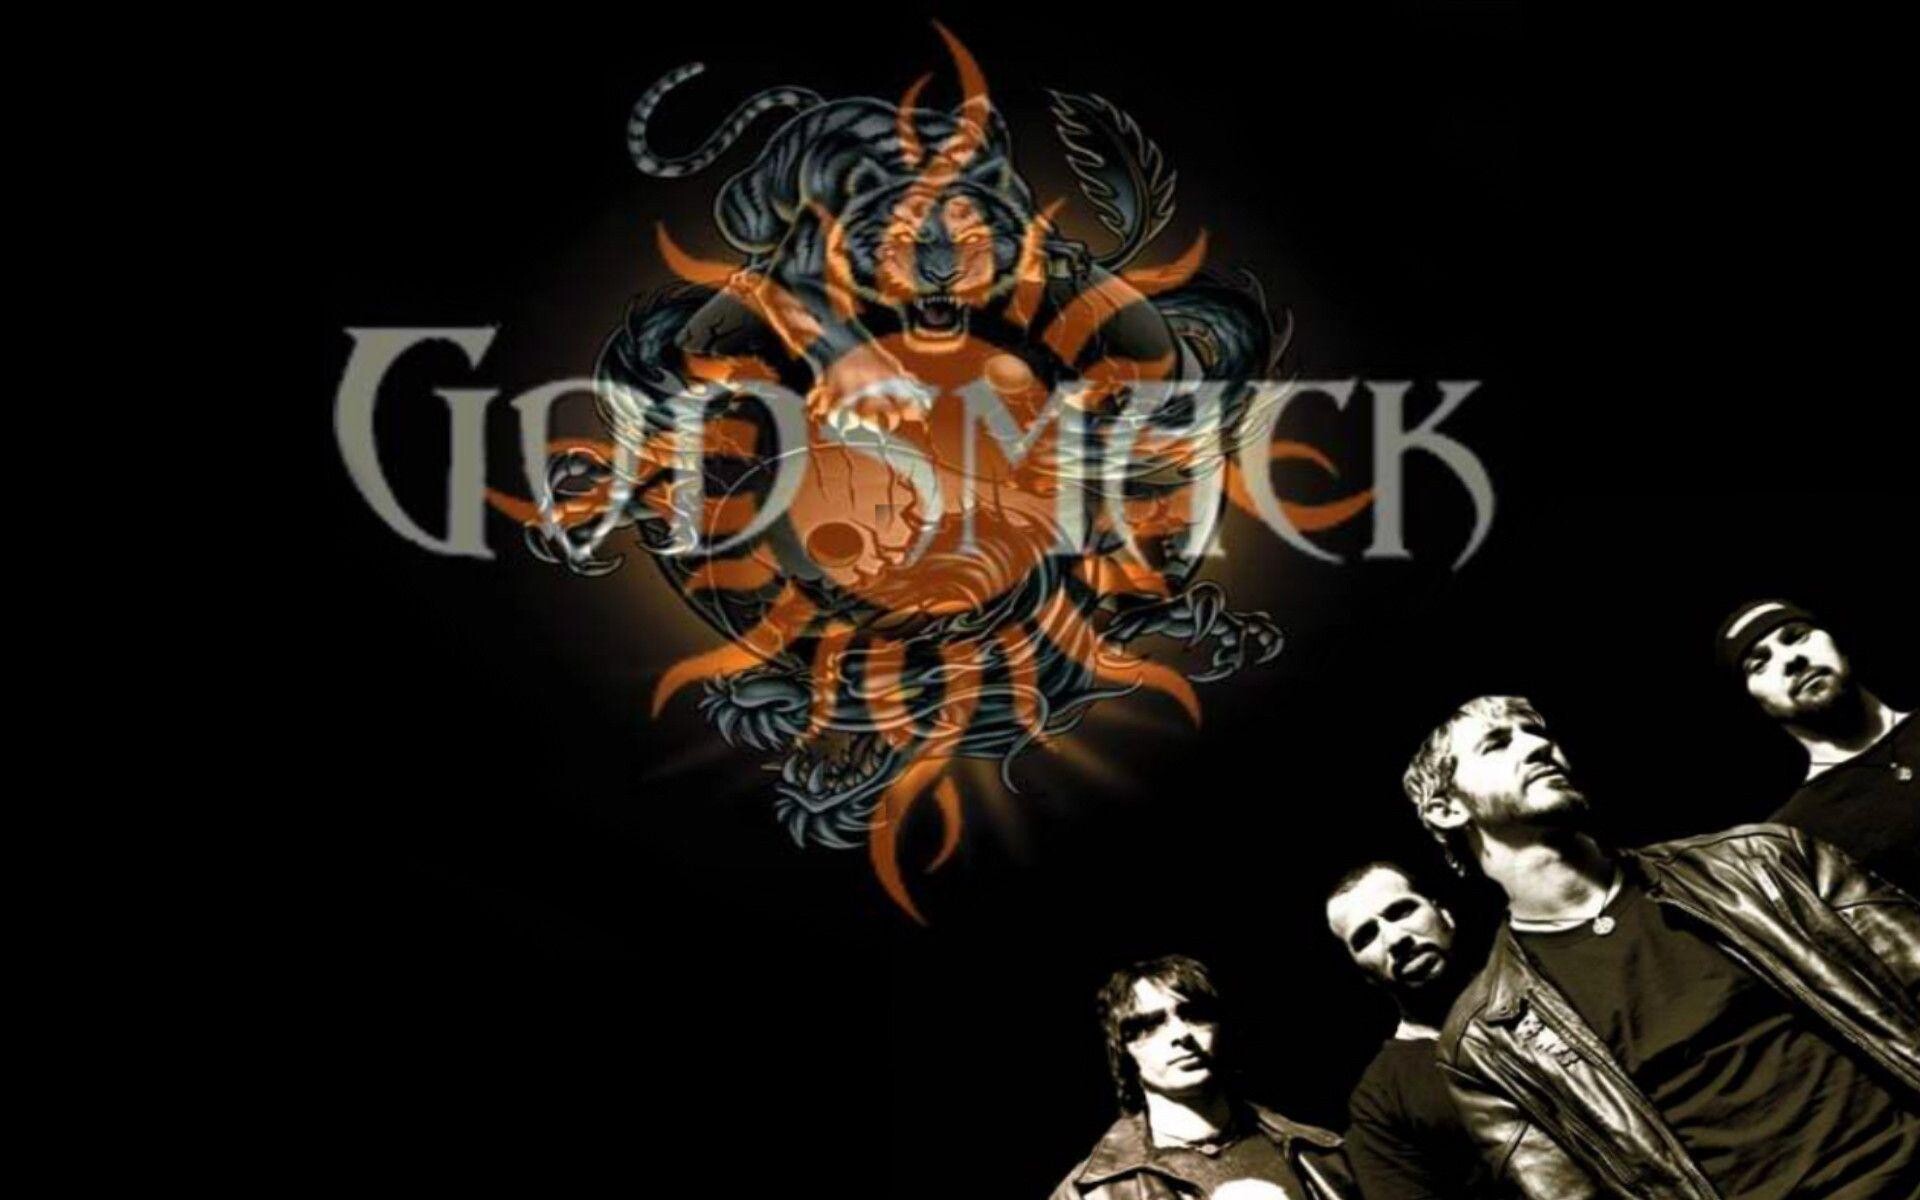 Godsmack: I don't know you, so don't freak on me, I can't control you, You're not my destiny. 1920x1200 HD Wallpaper.